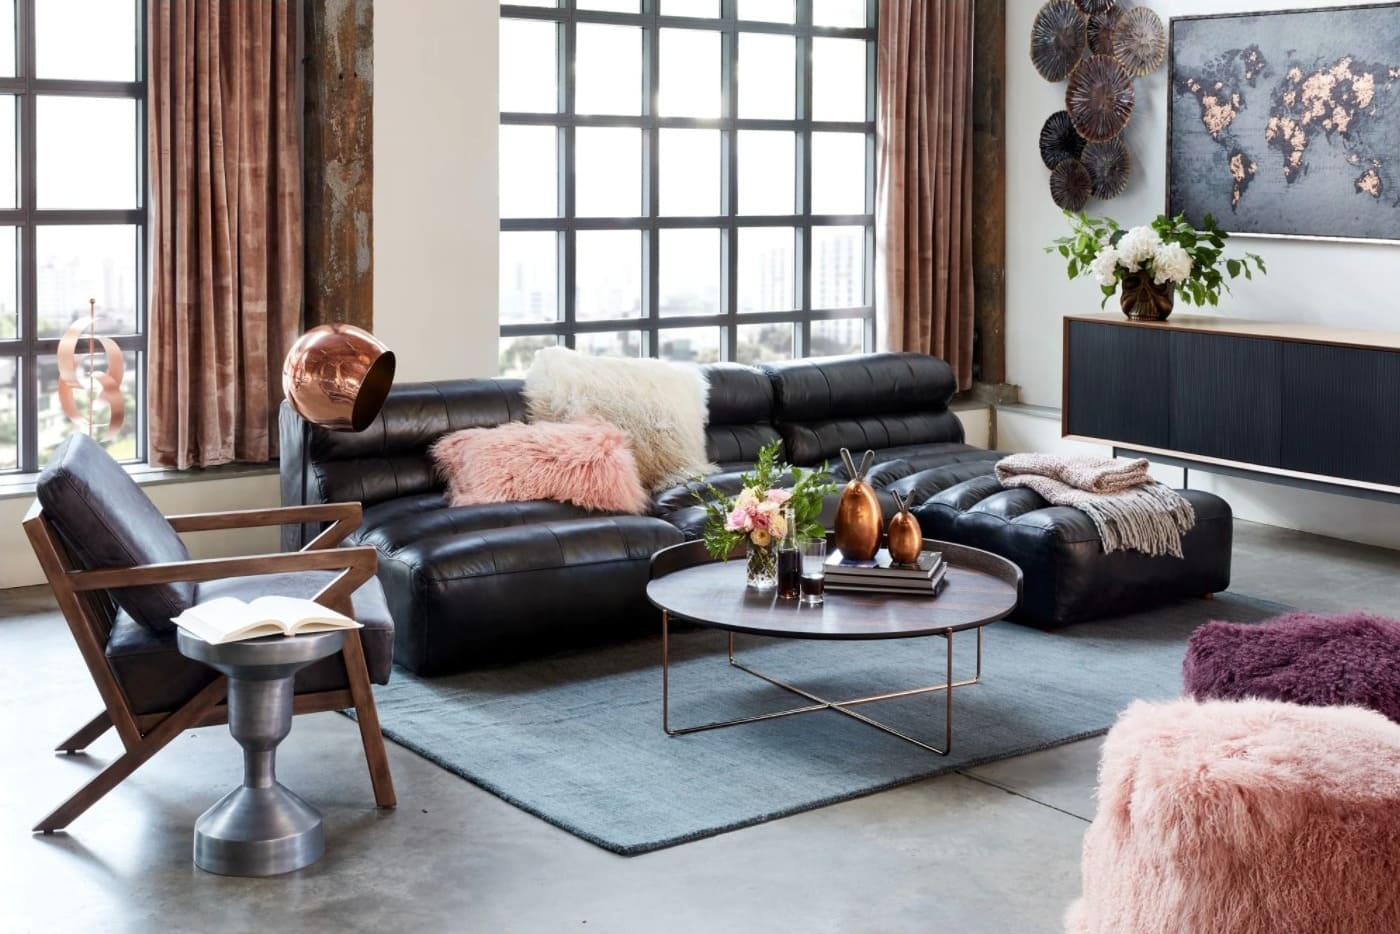 Add Some Texture With Fluffy Throw Pillows